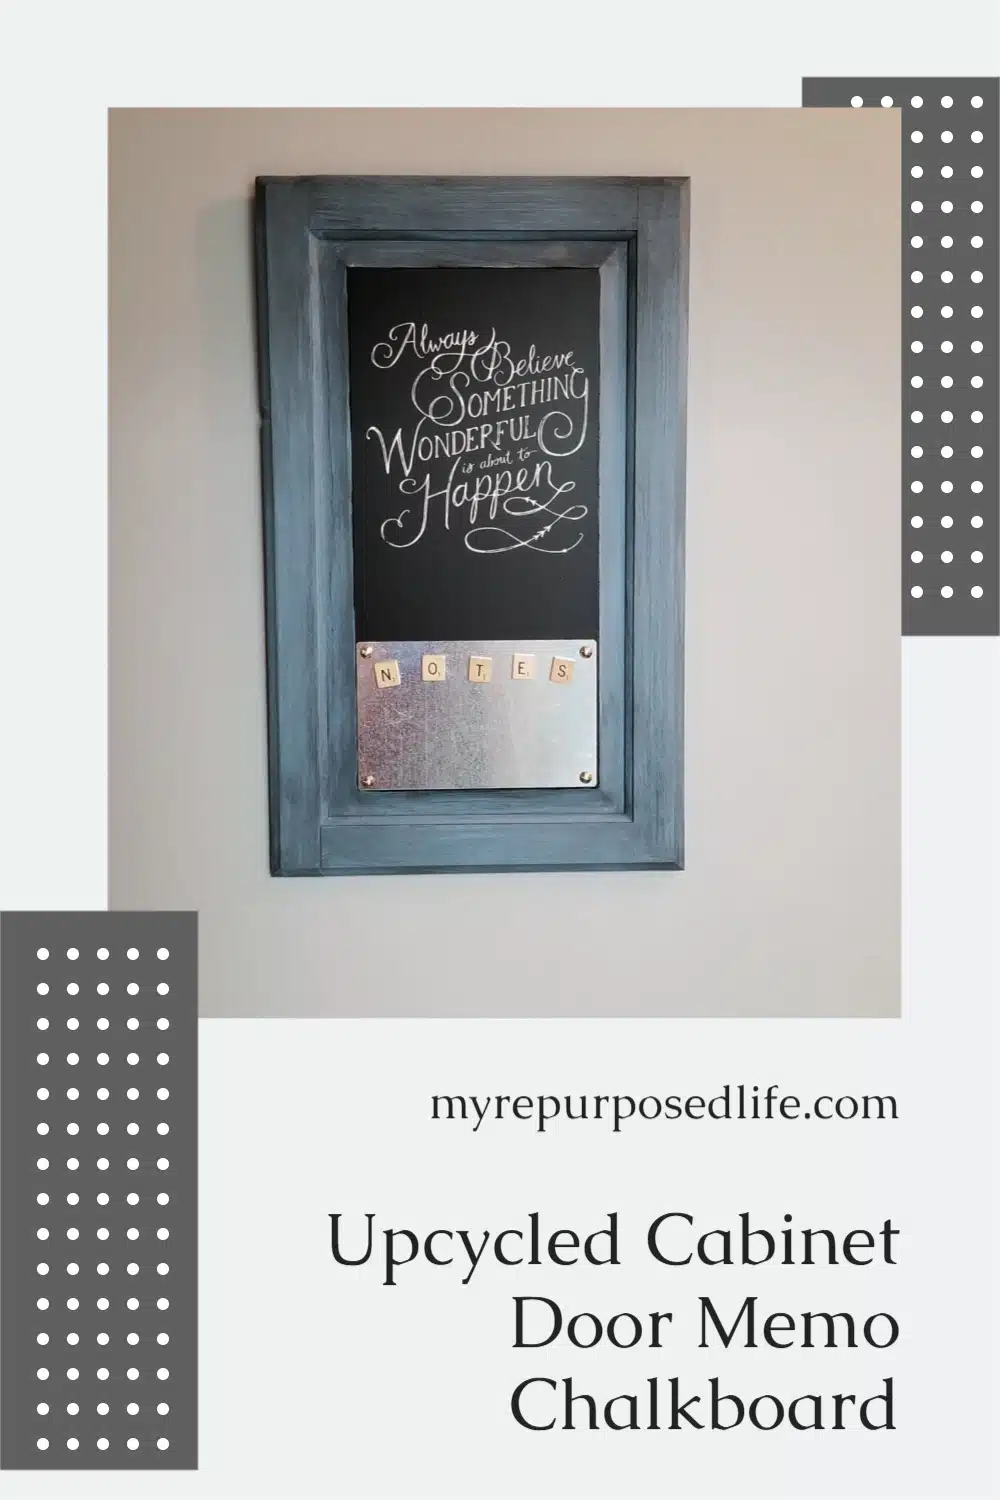 How to make a chalkboard magnetic memo out of a reclaimed cabinet door using a small piece of sheet metal and a Chalk Couture Transfer. Fun and easy project. #MyRepurposedLife #repurposed #cabinet #door #chalkboard #memo #magnetic #organizer #scrabbletiles via @repurposedlife